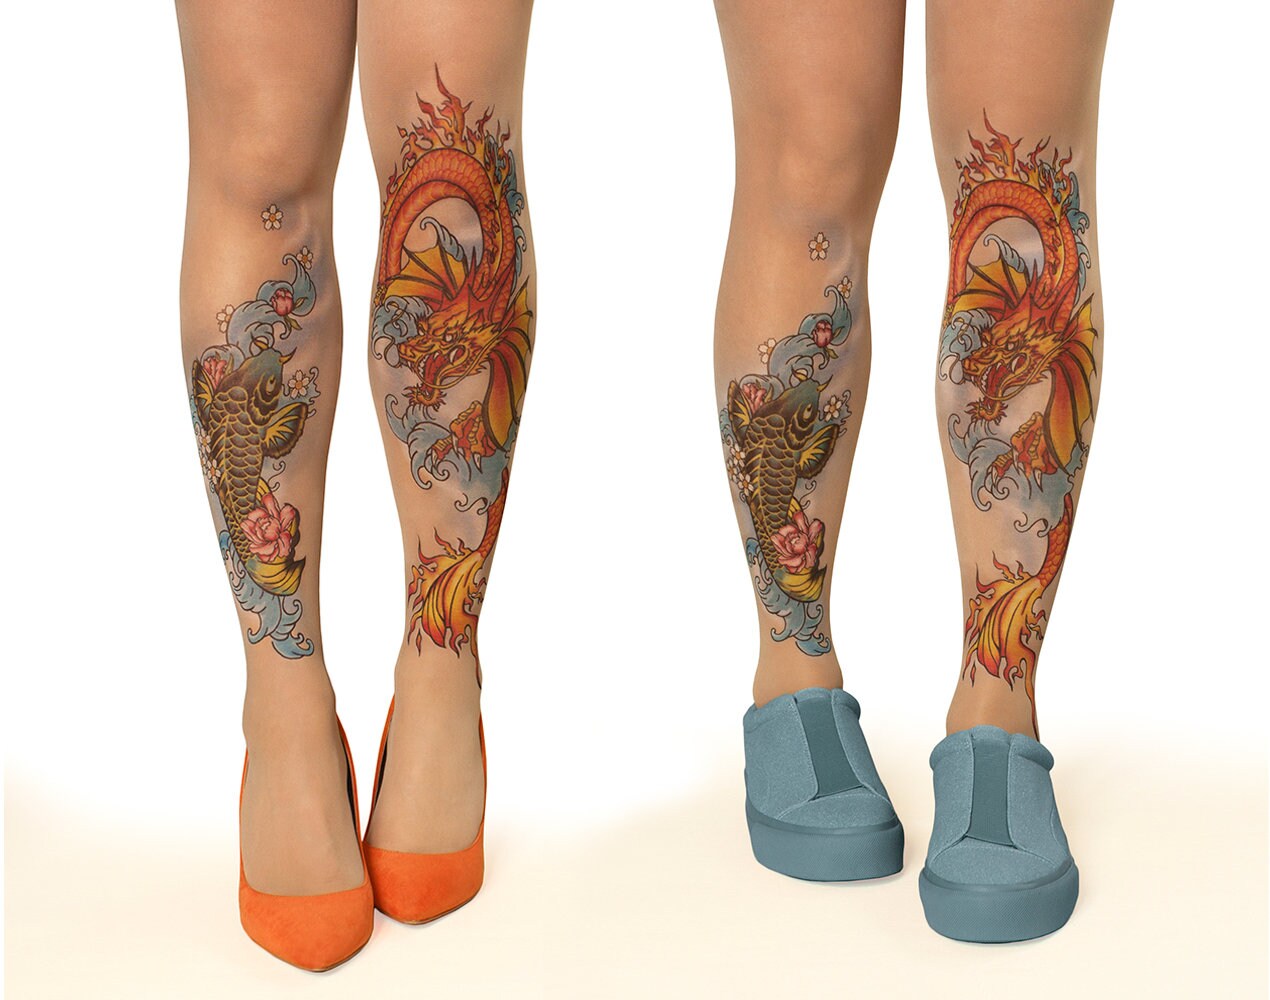 Buy Tattoo Tights/pantyhose With Koi Fish & Dragon, Sizes S-XL Online in  India 